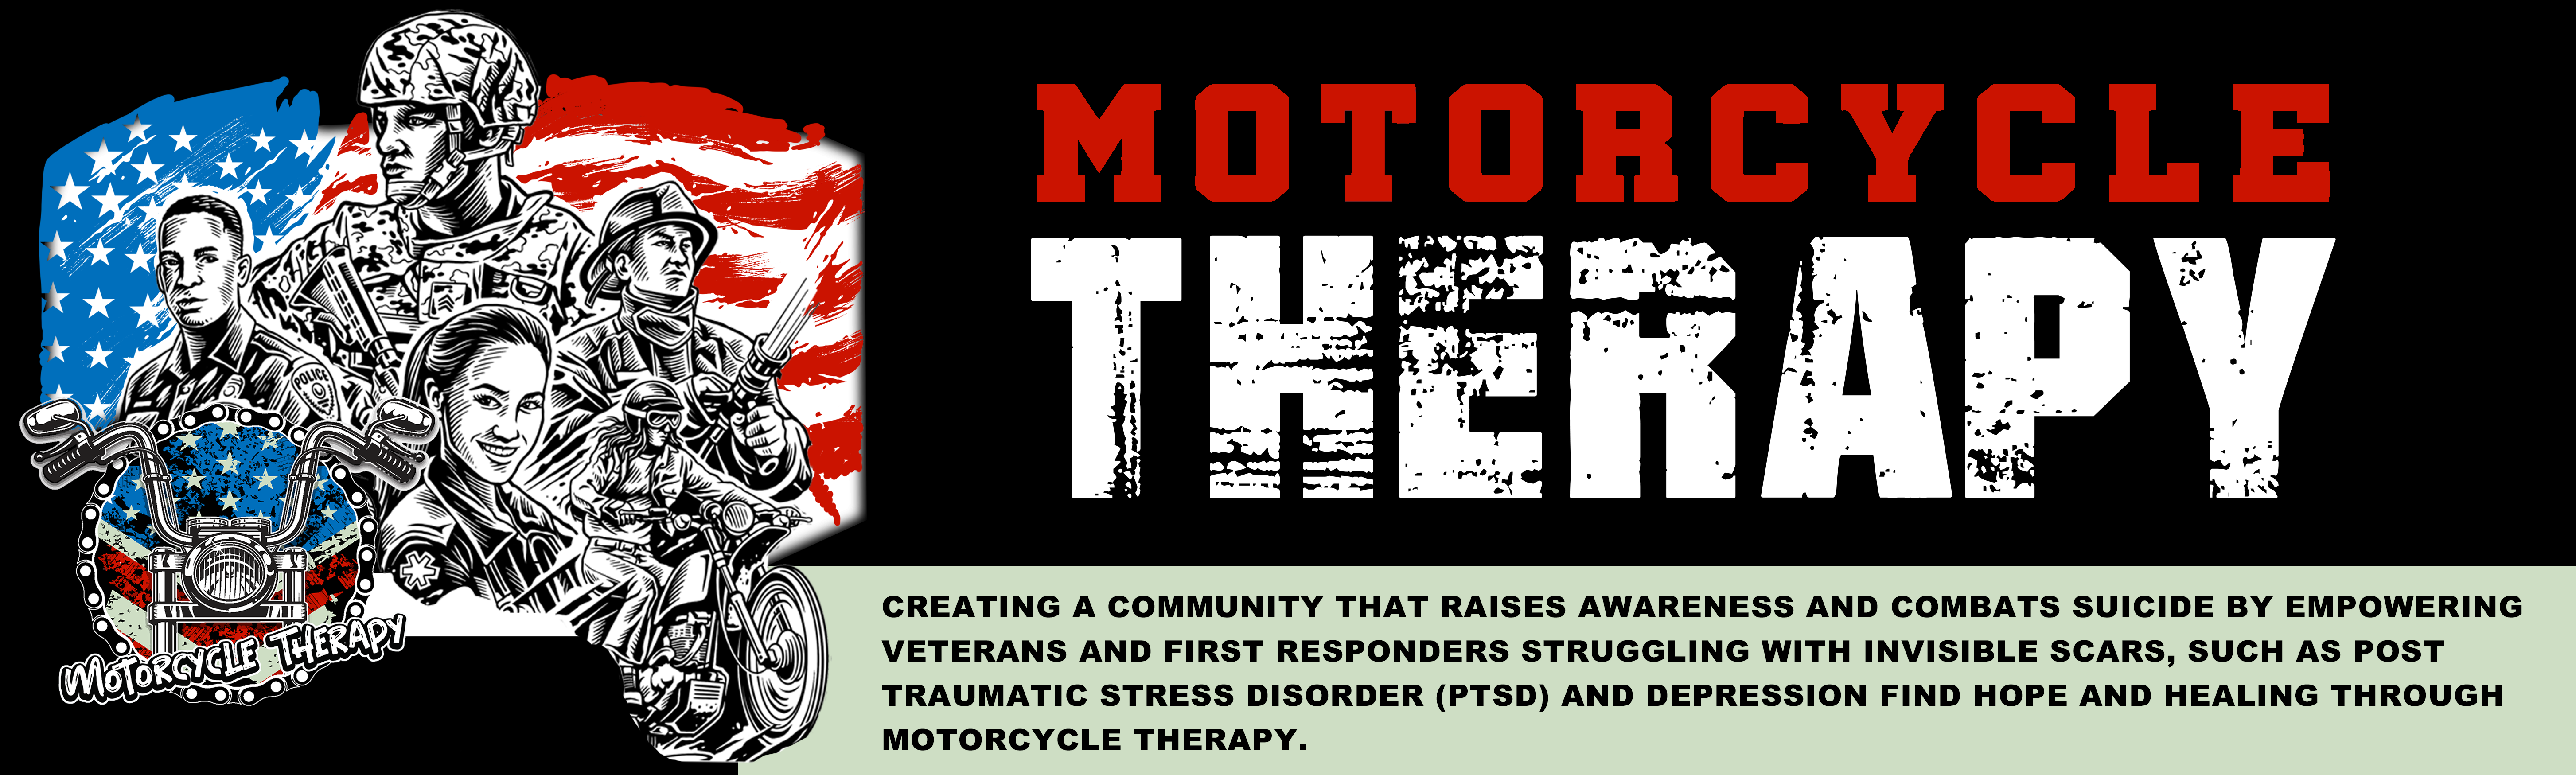 Motorcycle_Therapy_Header